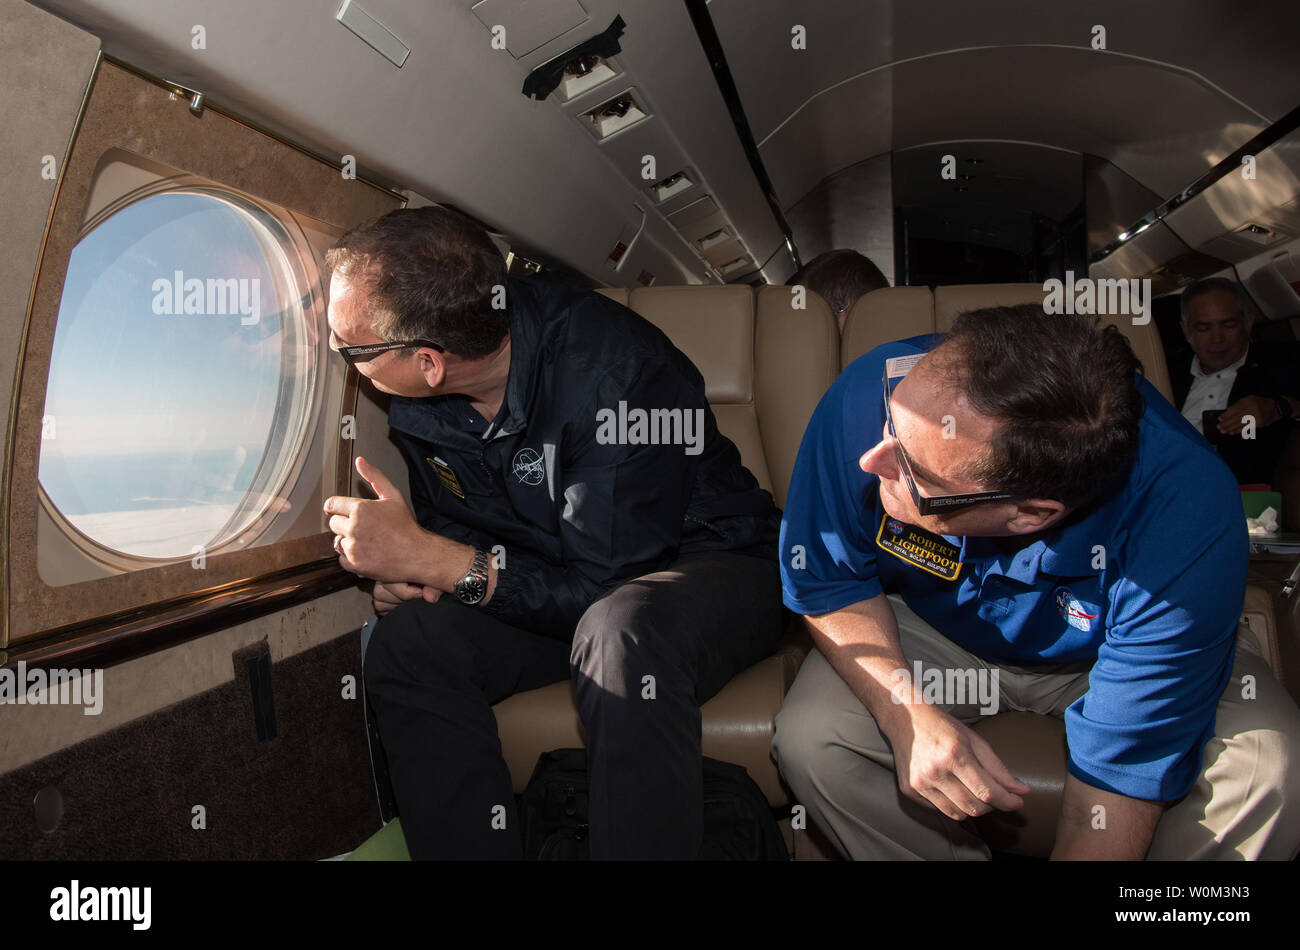 Acting NASA administrator Robert Lightfoot, right, and NASA Associate Administrator for the Science Mission Directorate Thomas Zurbuchen view the solar eclipse on August 21, 2017, from onboard a NASA Armstrong Flight Research CenterÕs Gulfstream III 35,000 feet above the Oregon Coast. A total solar eclipse swept across a narrow portion of the contiguous United States from Lincoln Beach, Oregon to Charleston, South Carolina. NASA Photo by Carla Thomas/UPI Stock Photo